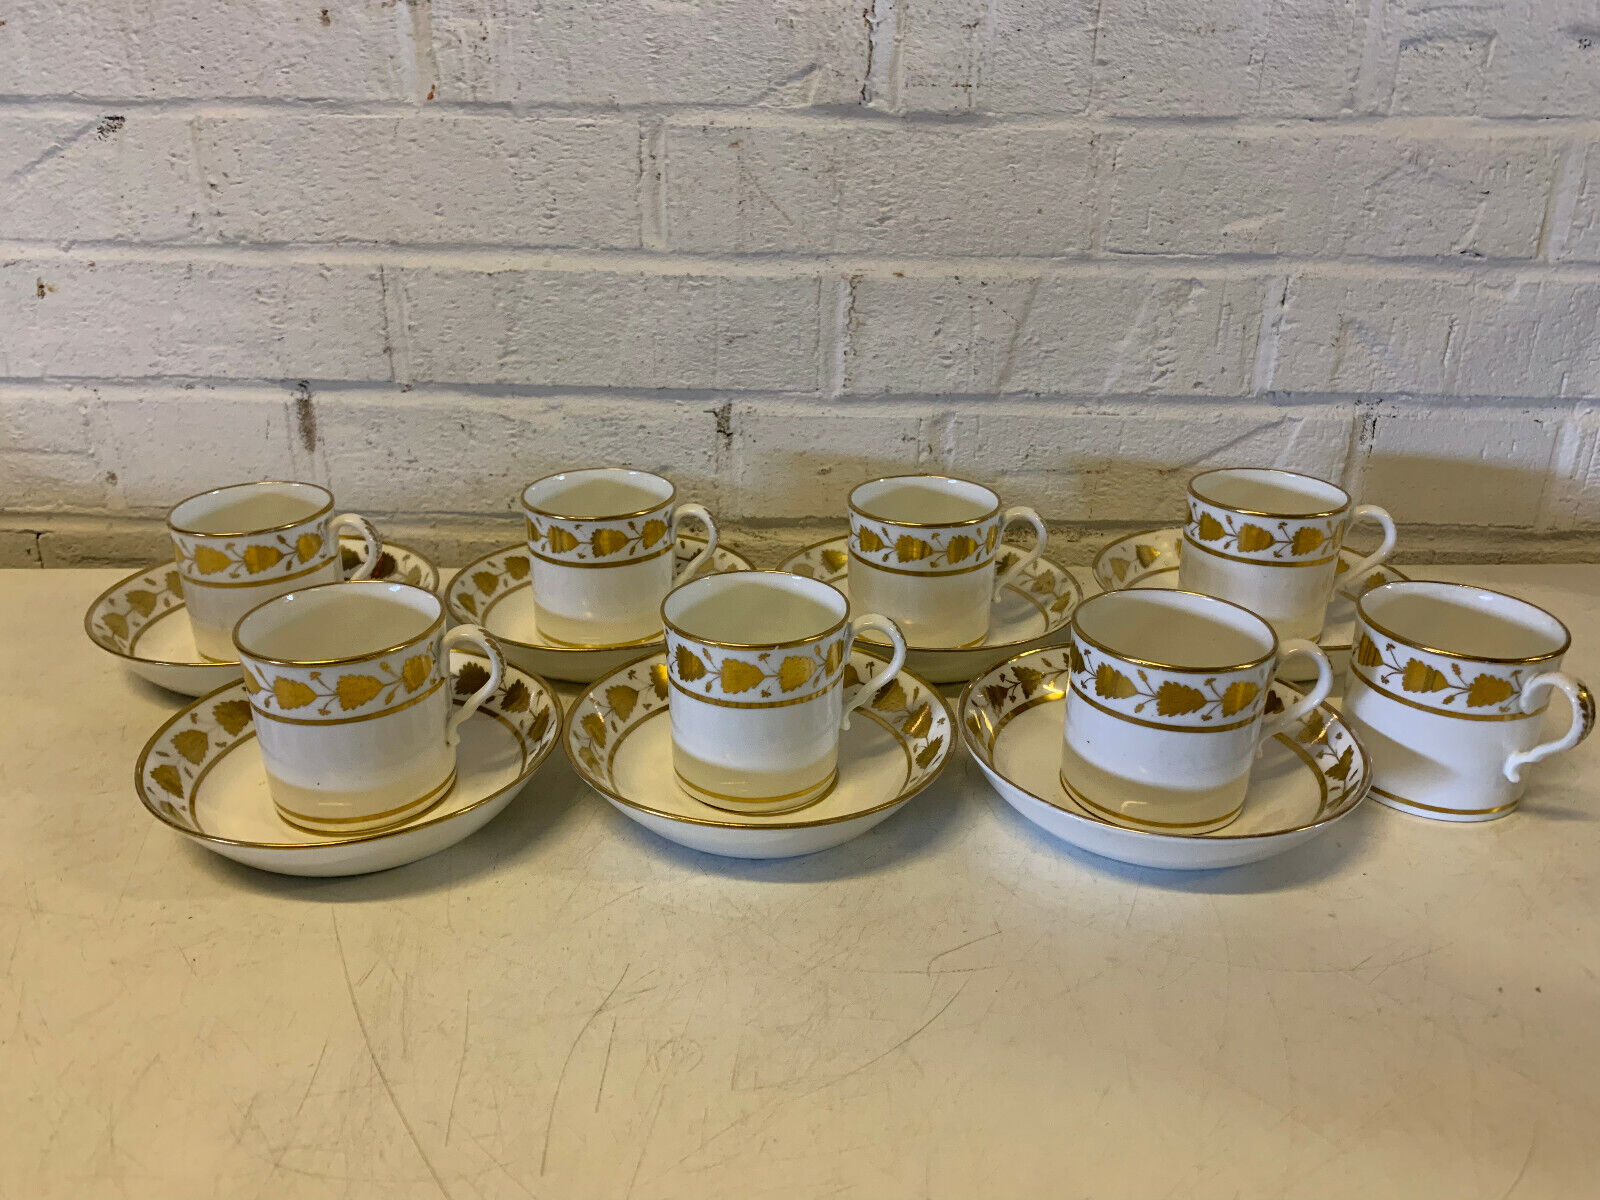 Antique English Likely Worcester Set of 7 Gold & White Porcelain Cups & Saucers